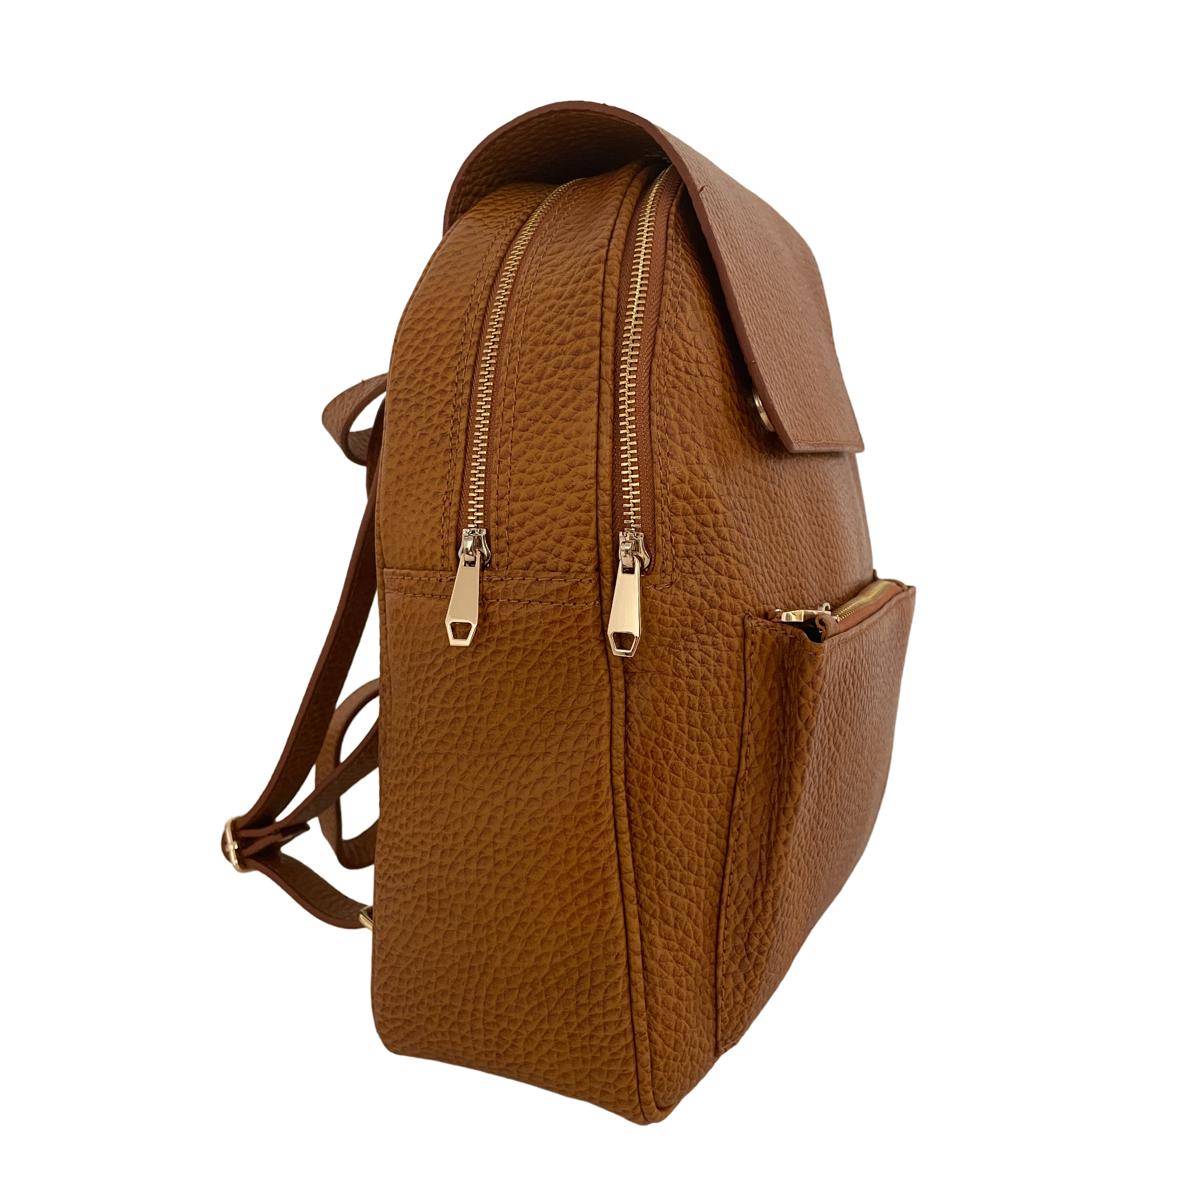 LeatherLuxe - Light brown Leather Women's Backpack Genuine leather Designer Premium leather bag for women leather hobo tote messenger bag Leather Accessories Leather Shop Leather Goods